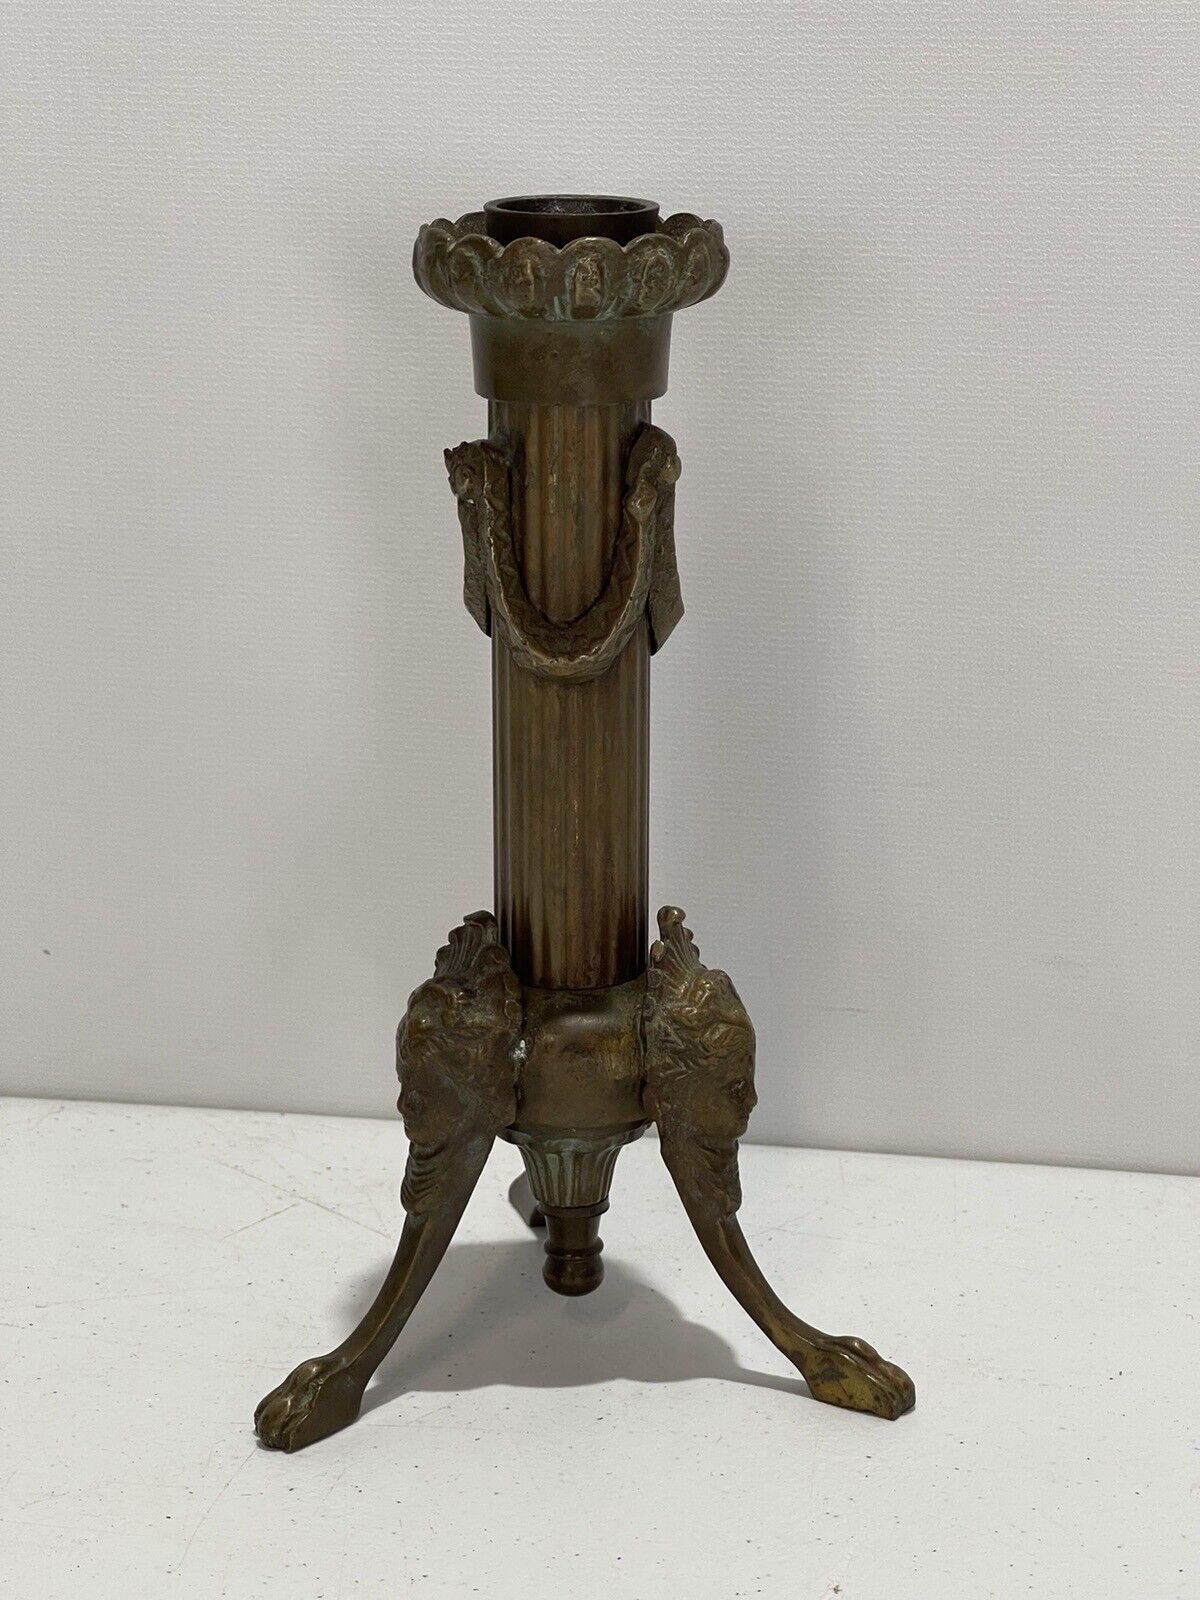 ANTIQUE BRONZE FRENCH EMPIRE STYLE CANDLESTICK CANDLE HOLDER